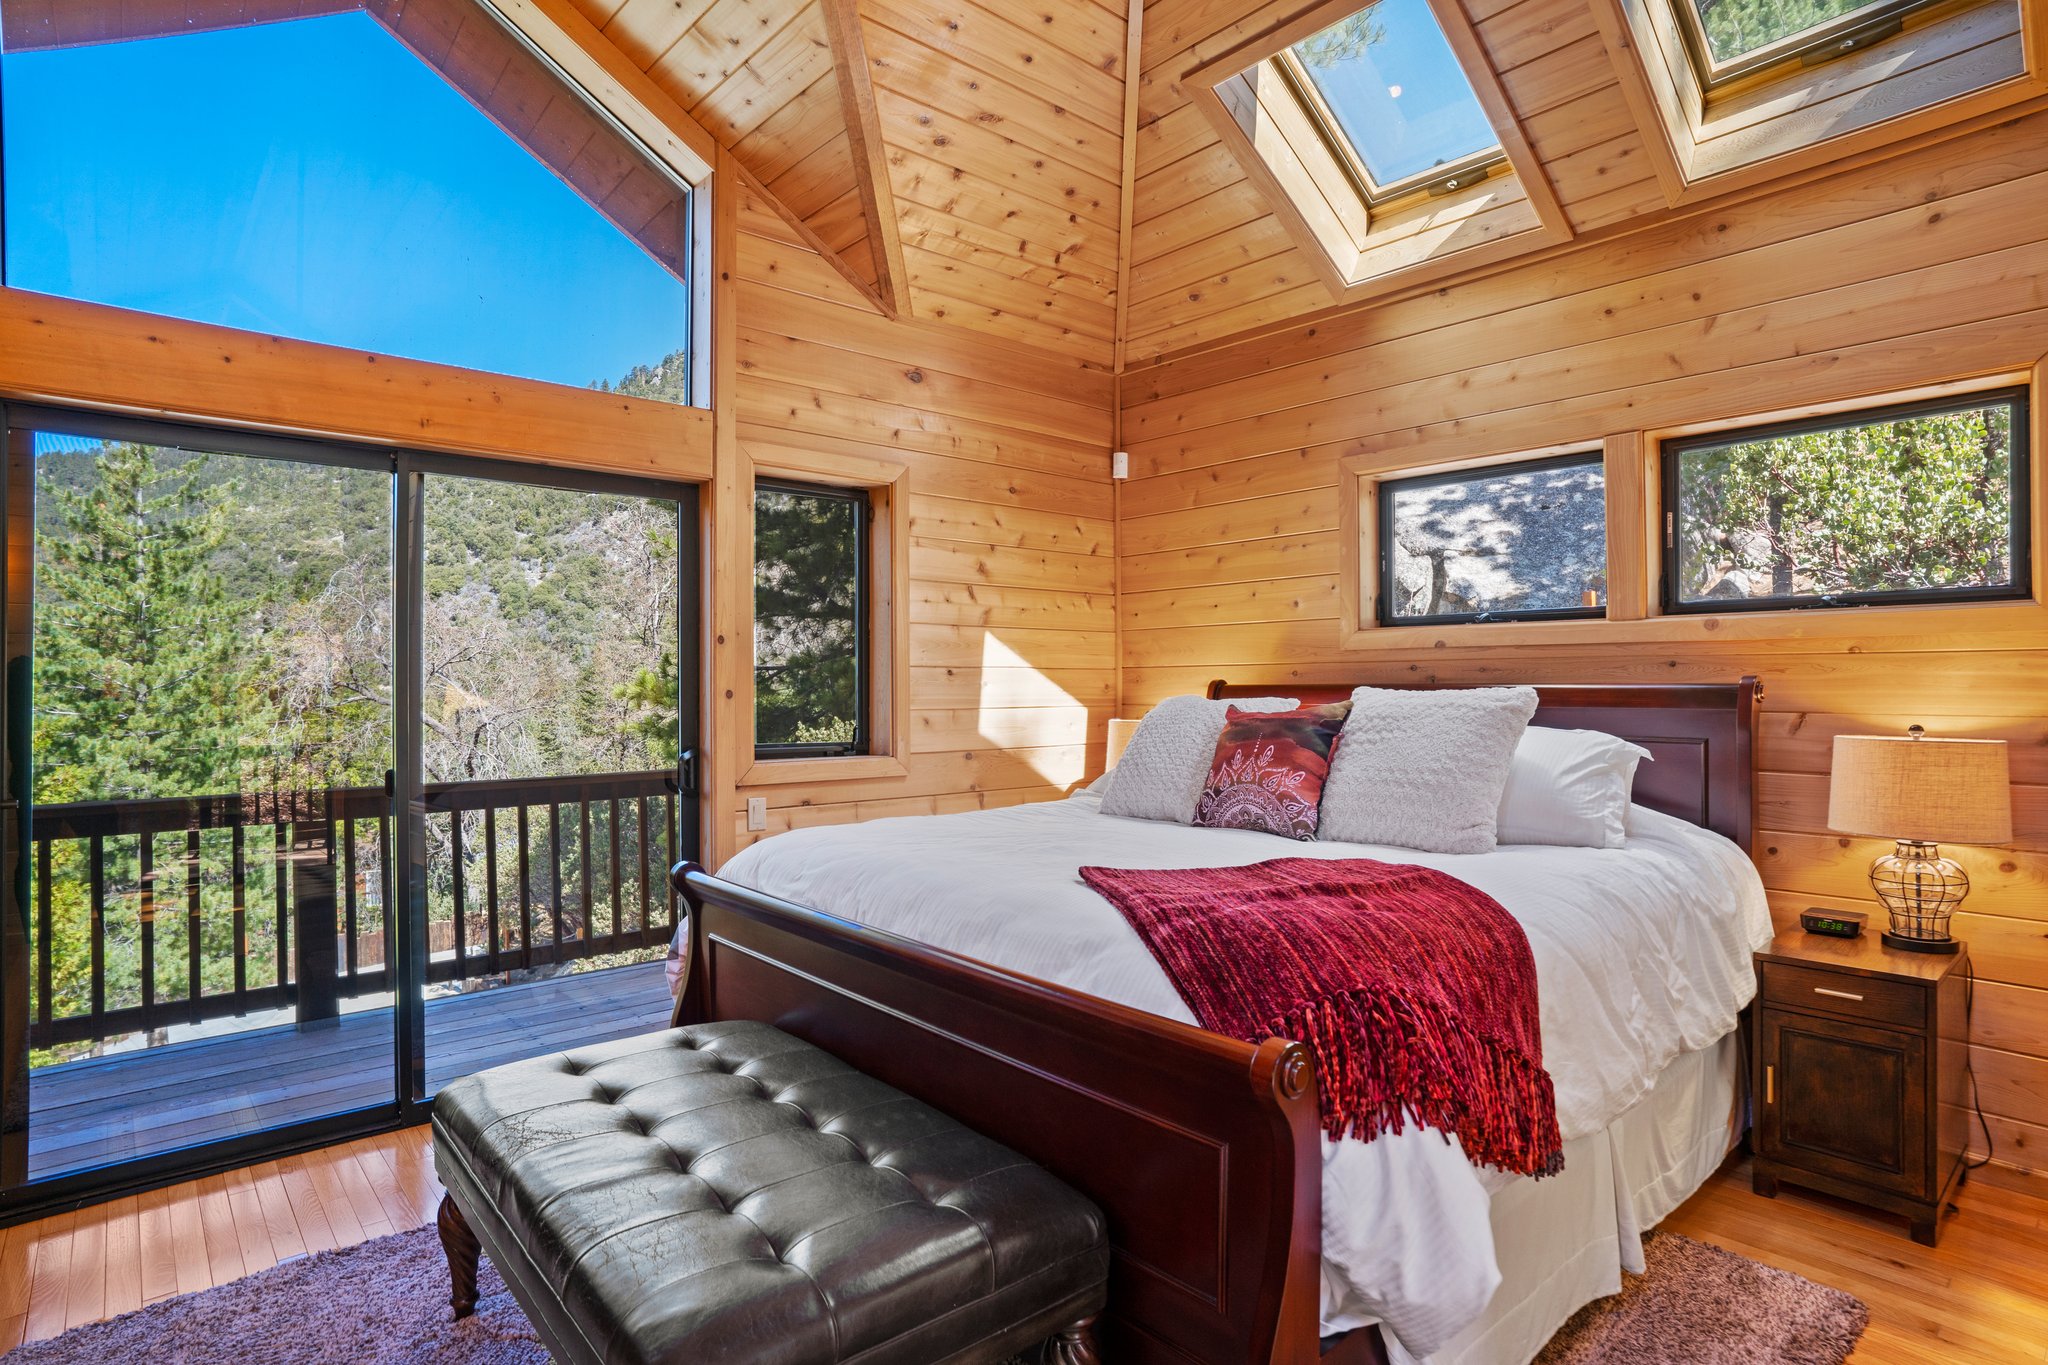 Master Bedroom and it's views!